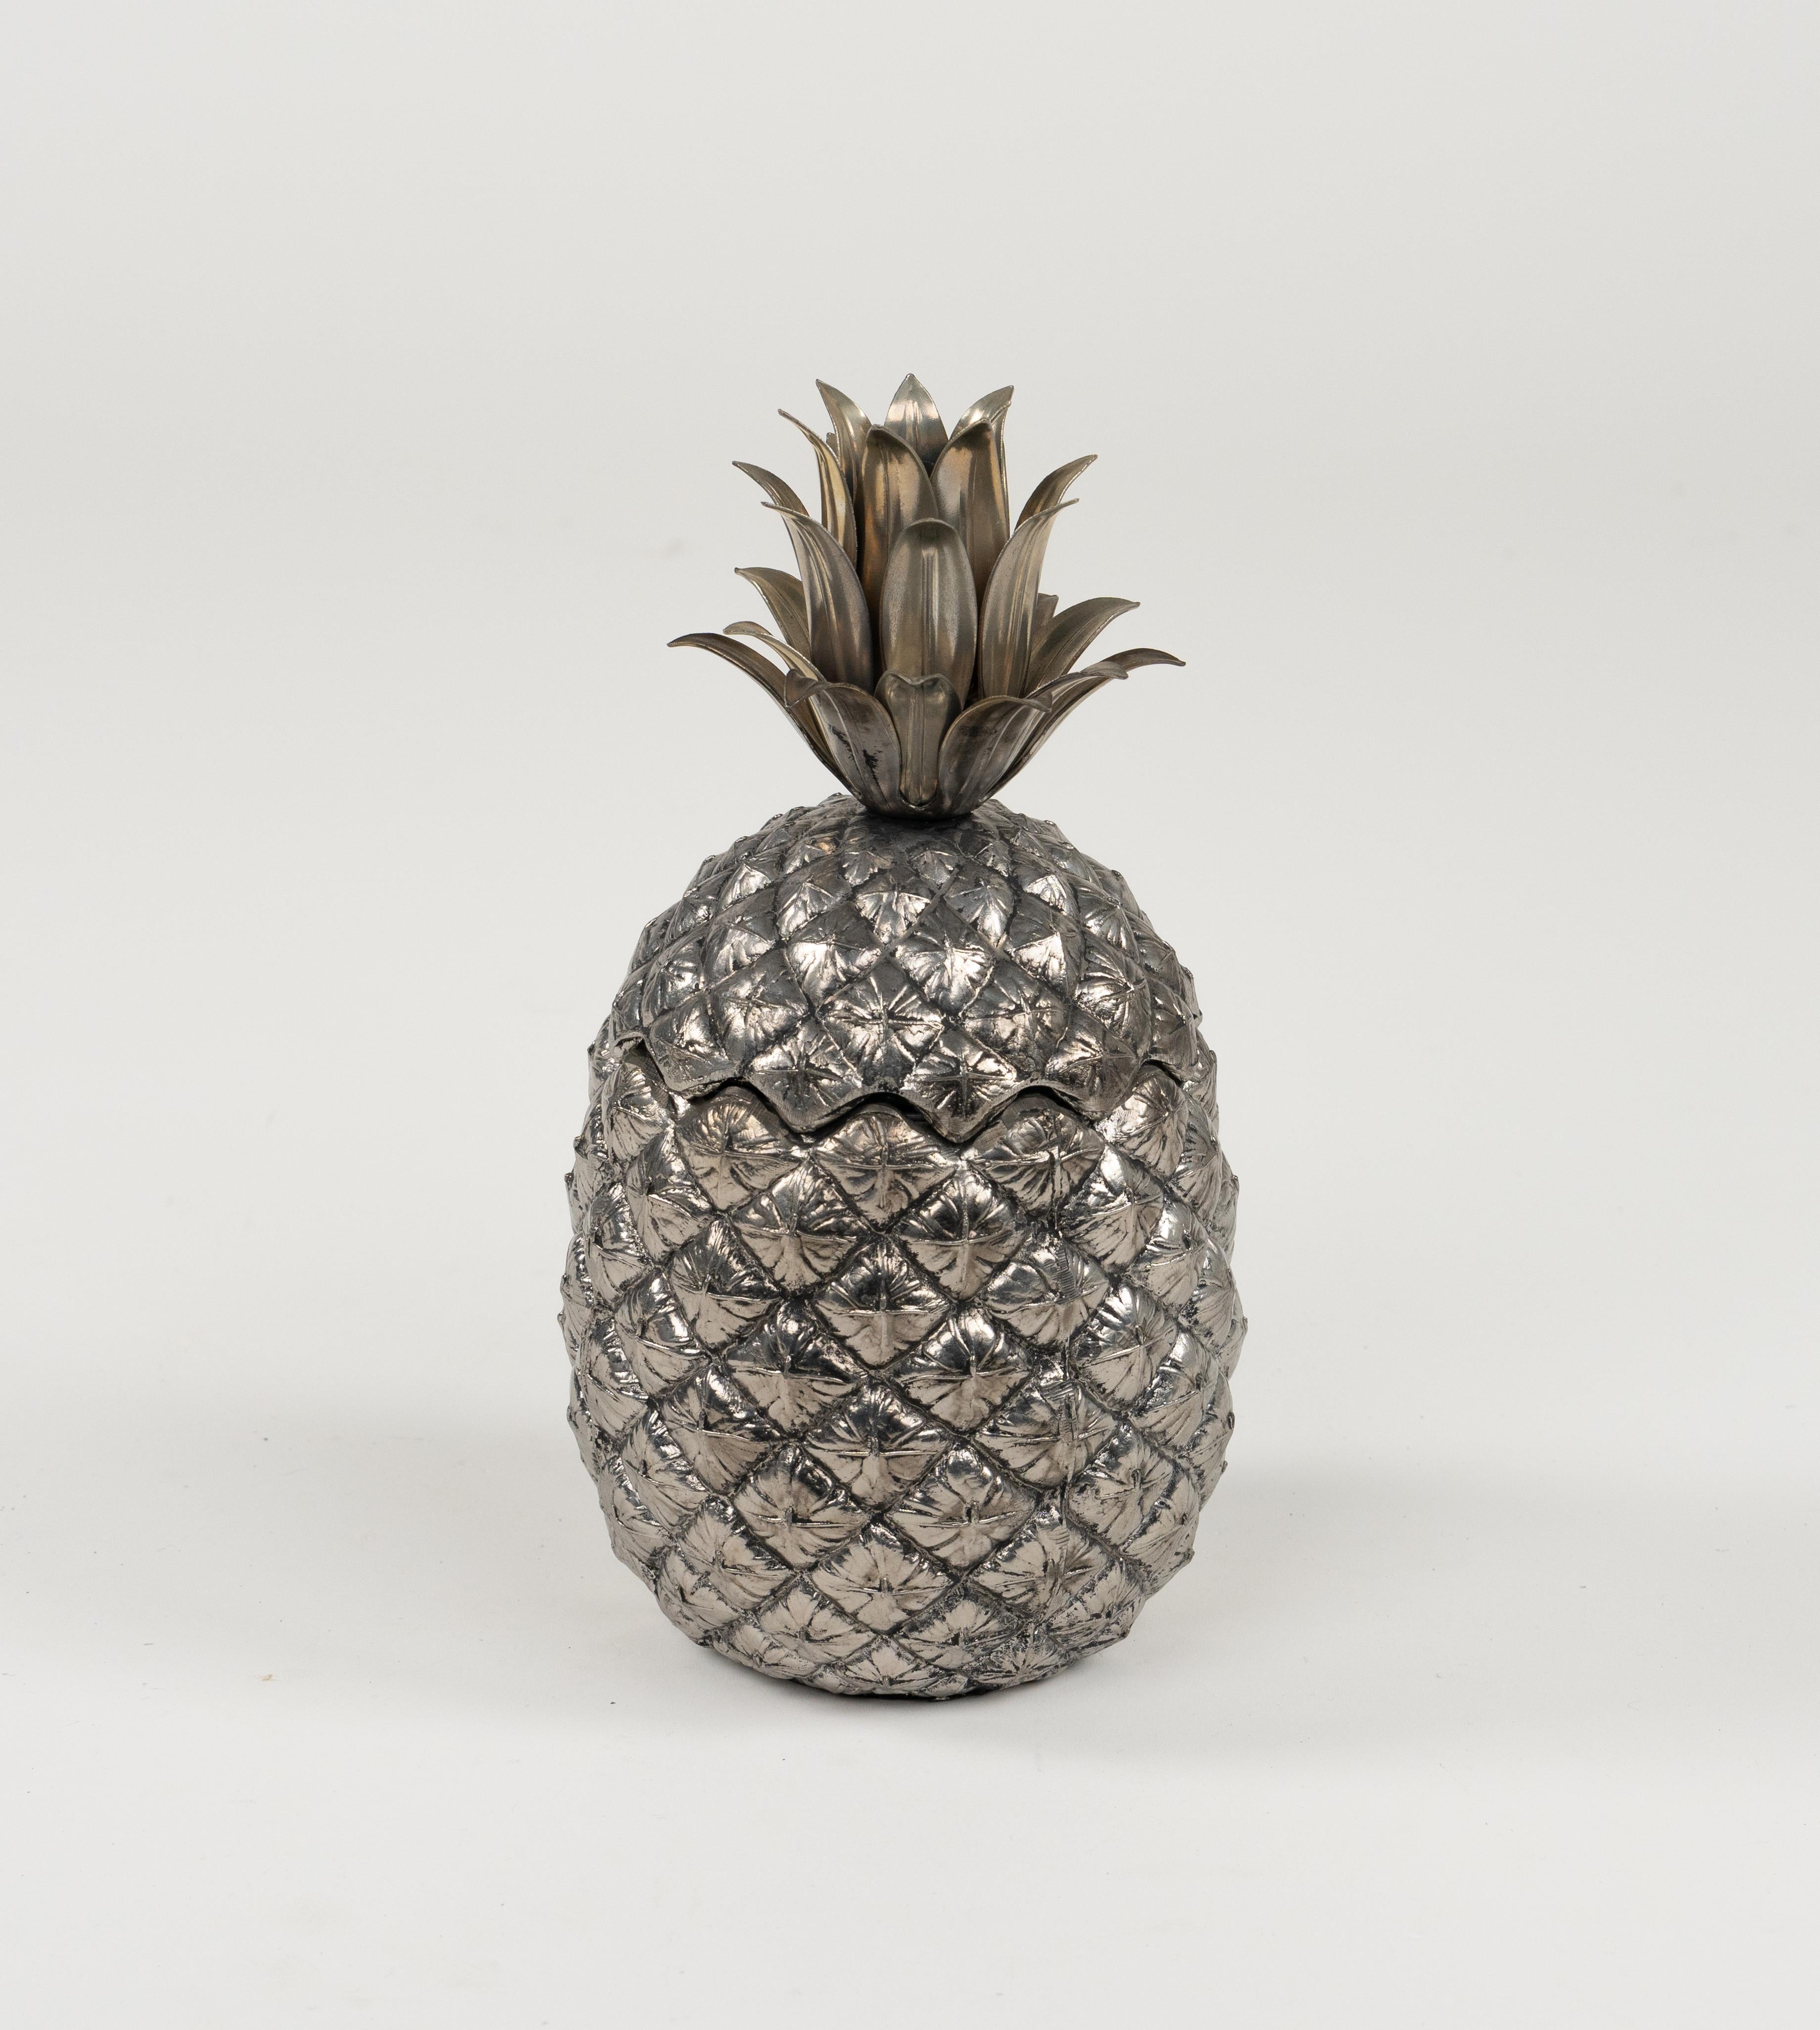 Midcentury Pewter Pineapple Form Ice Bucket by Mauro Manetti Italy, 1960s For Sale 2